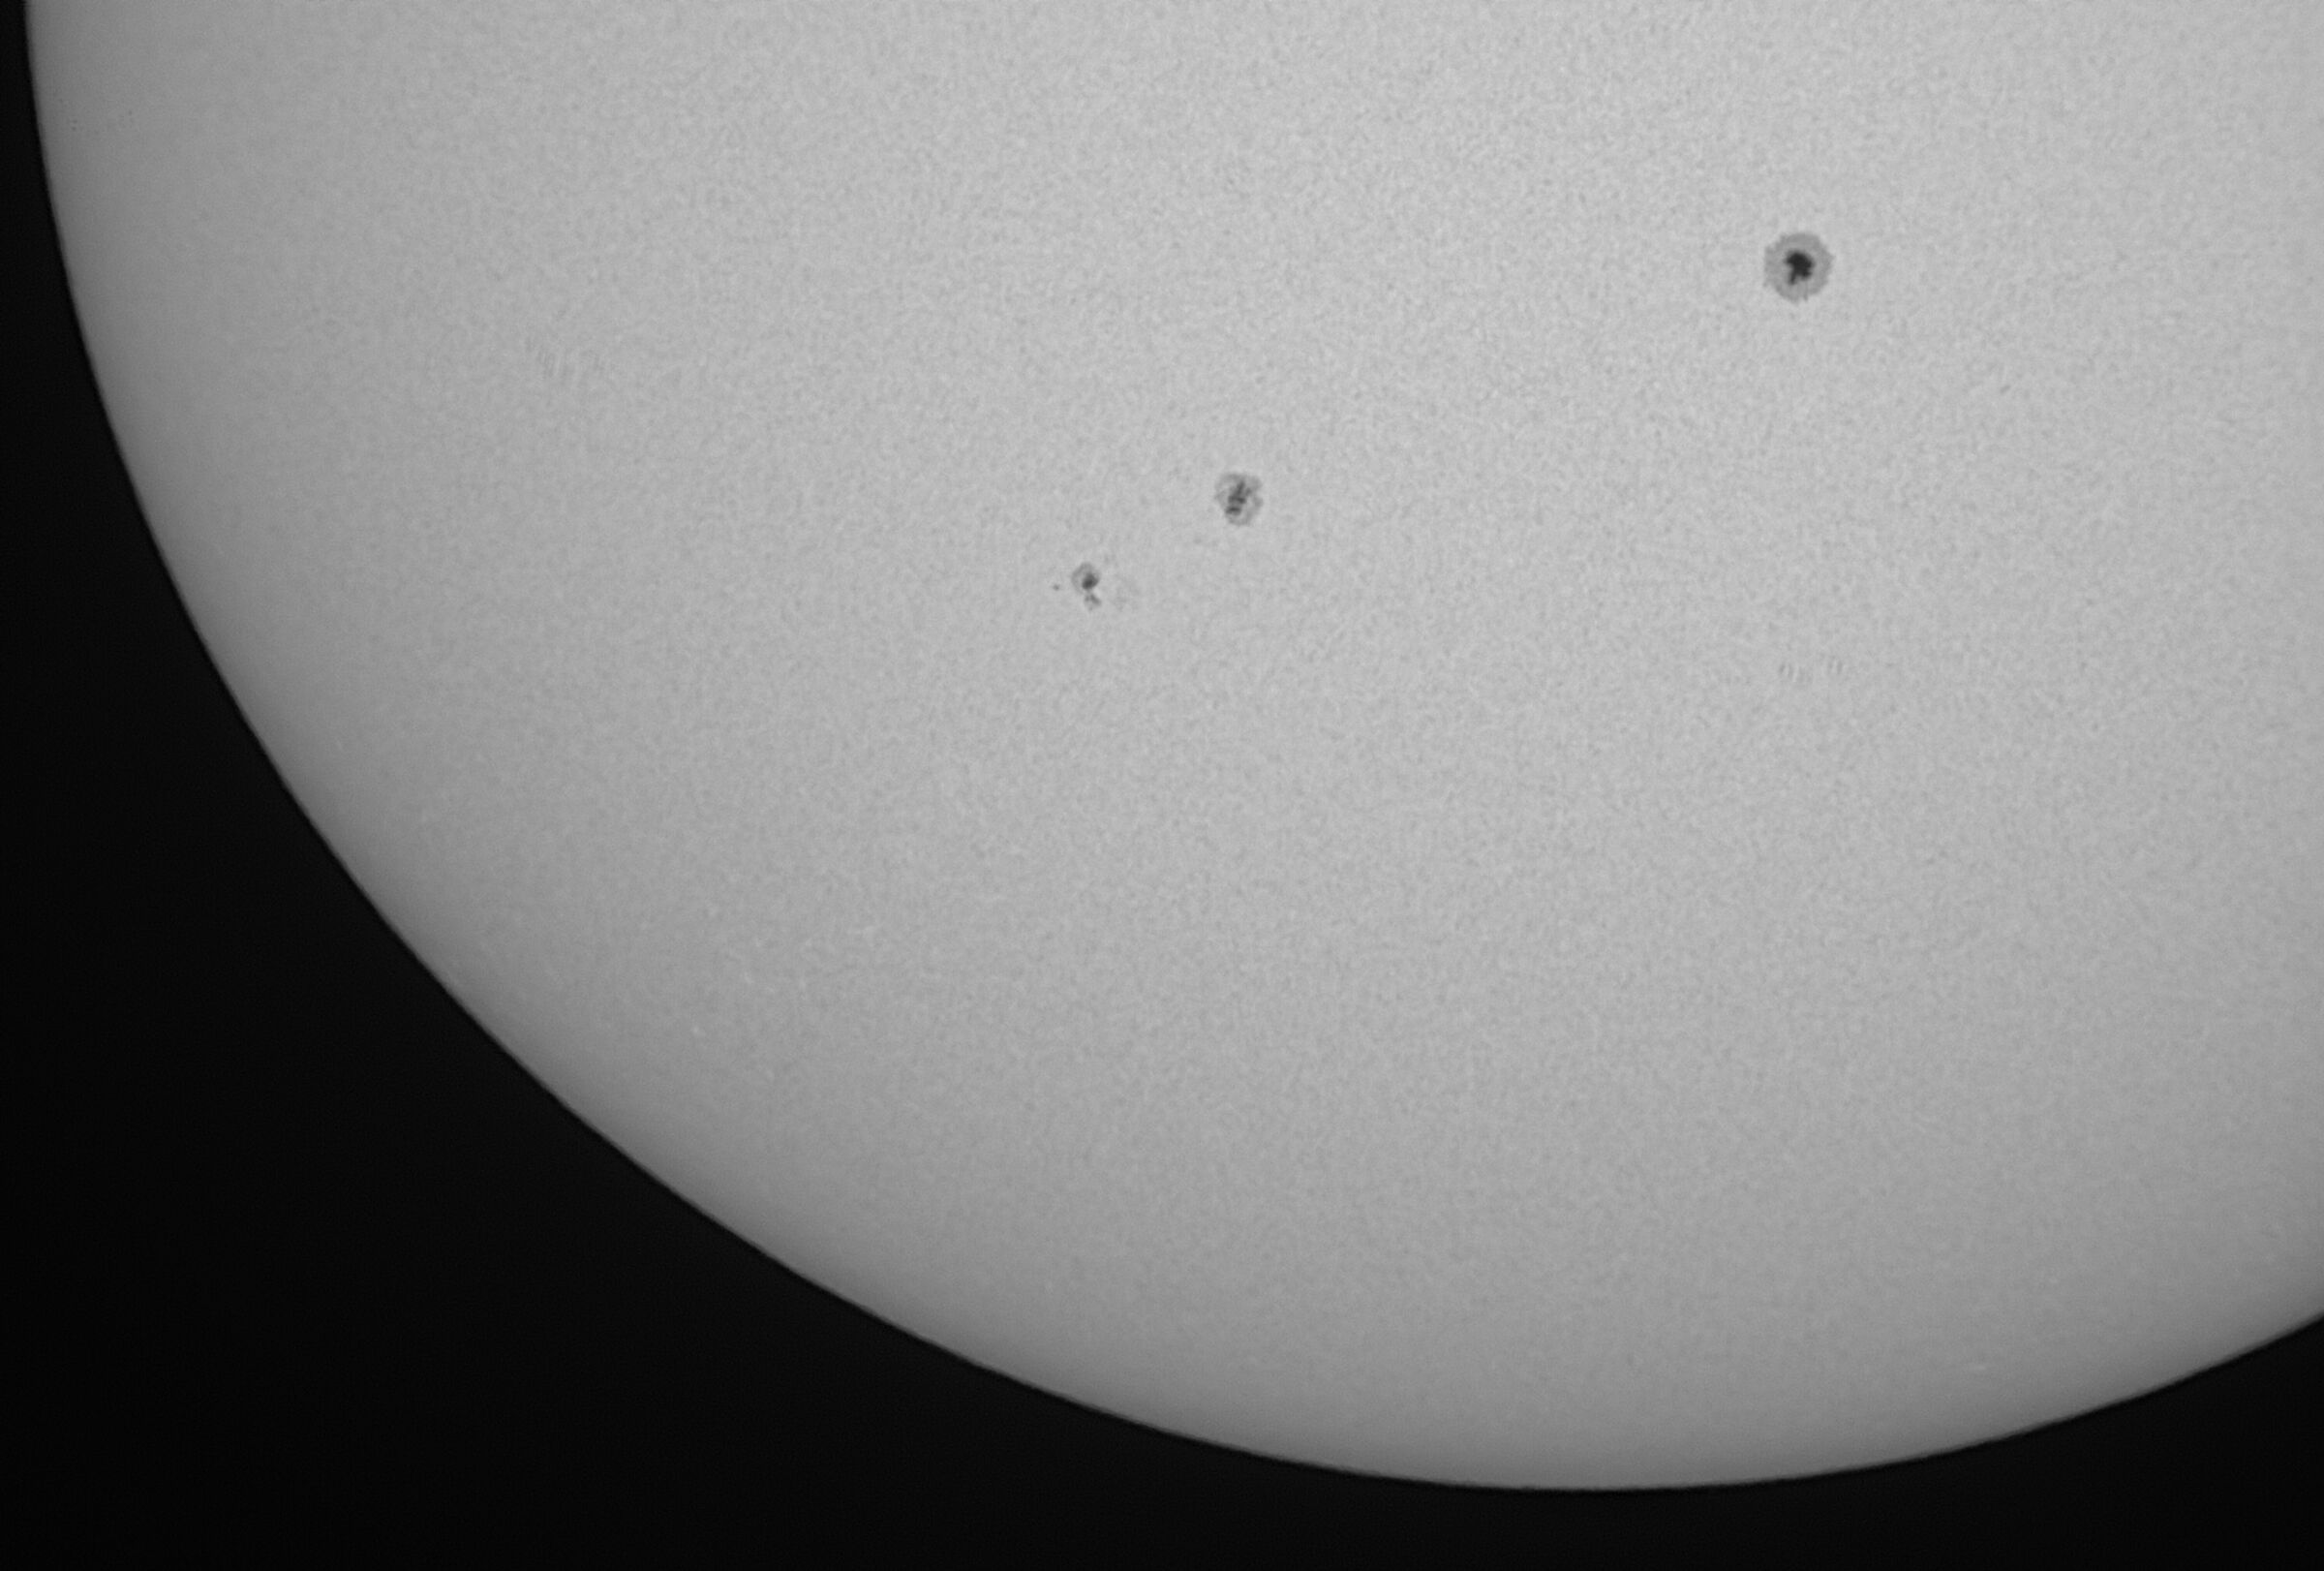 Sunspots 2794 and 2795 of 27/12/2020...